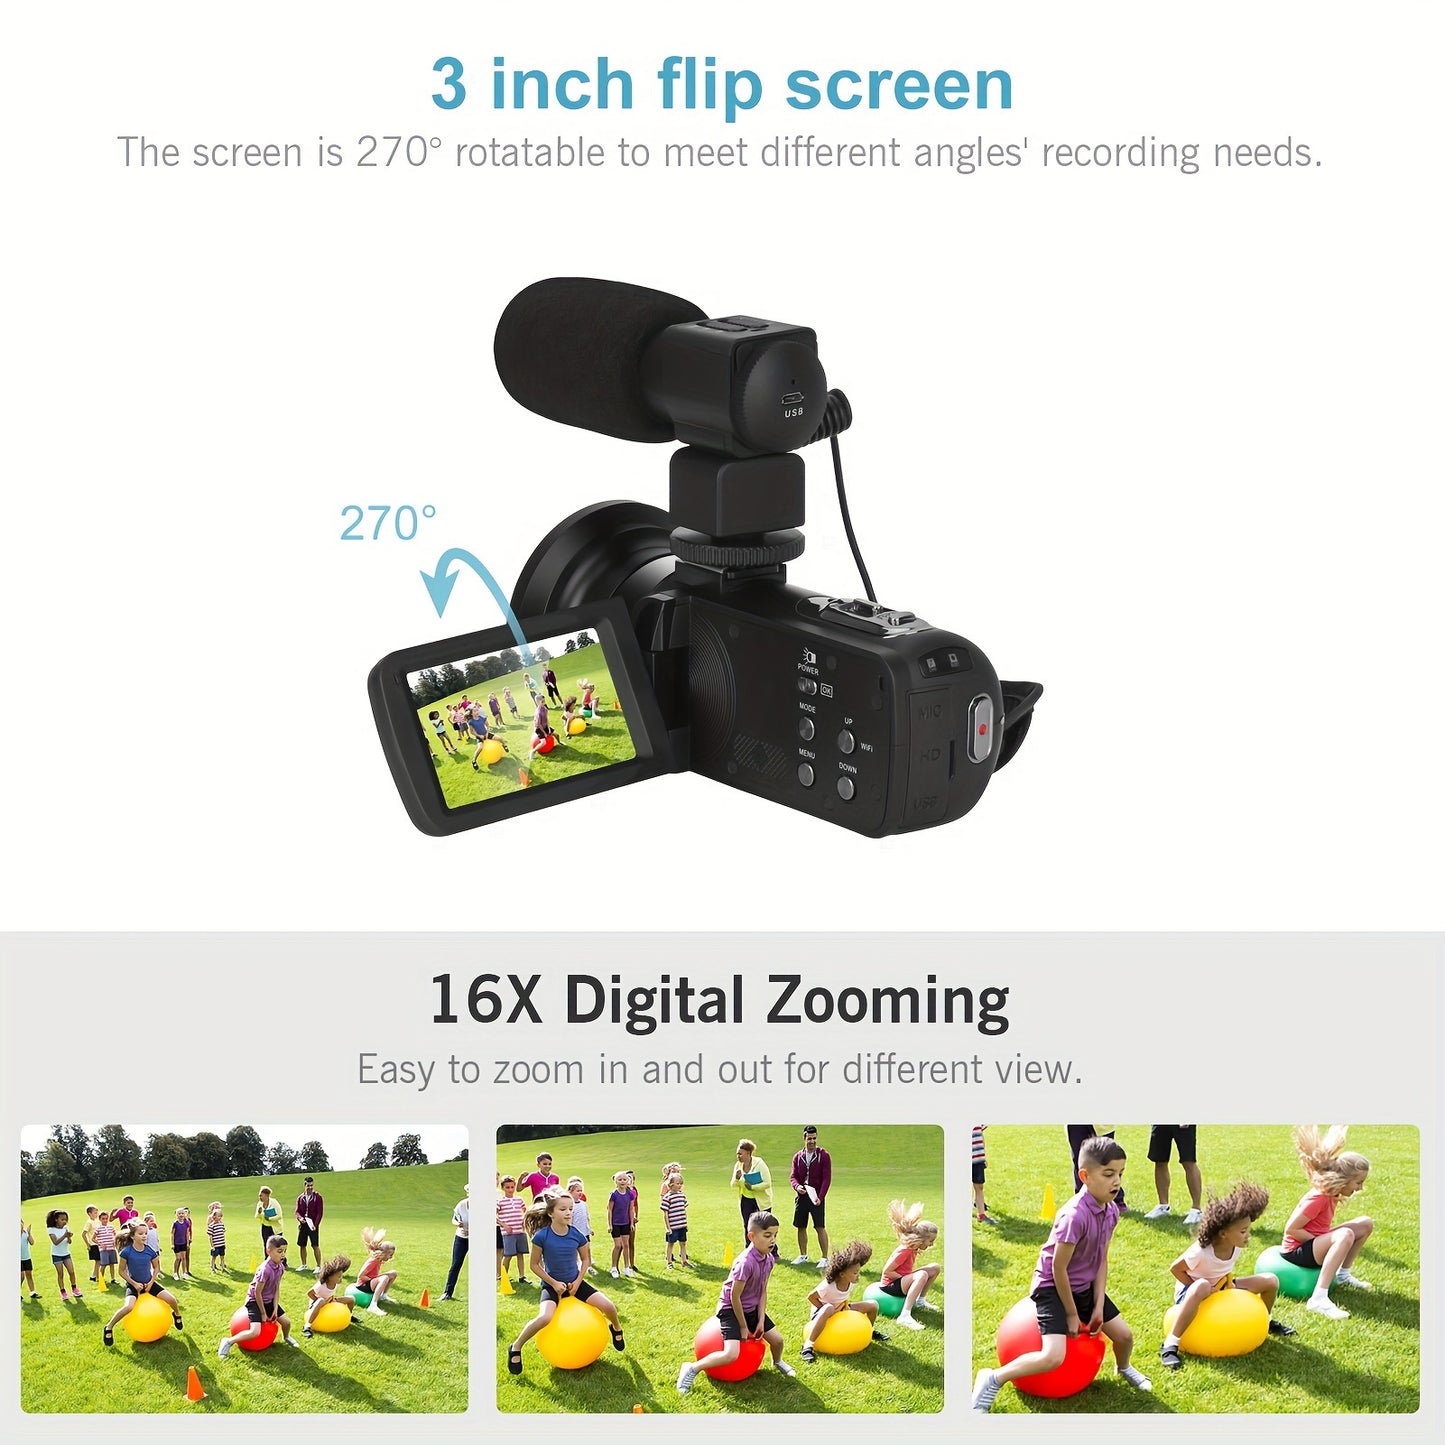 Handheld Camera With 32GB Card And Microphone - 4K 60fps Video Resolution, 4800M Photo Resolution, 16x Digital Zoom, 3.0-inch Touchscreen, WiFi, Rotating Screen - Perfect For Vlogging And Content